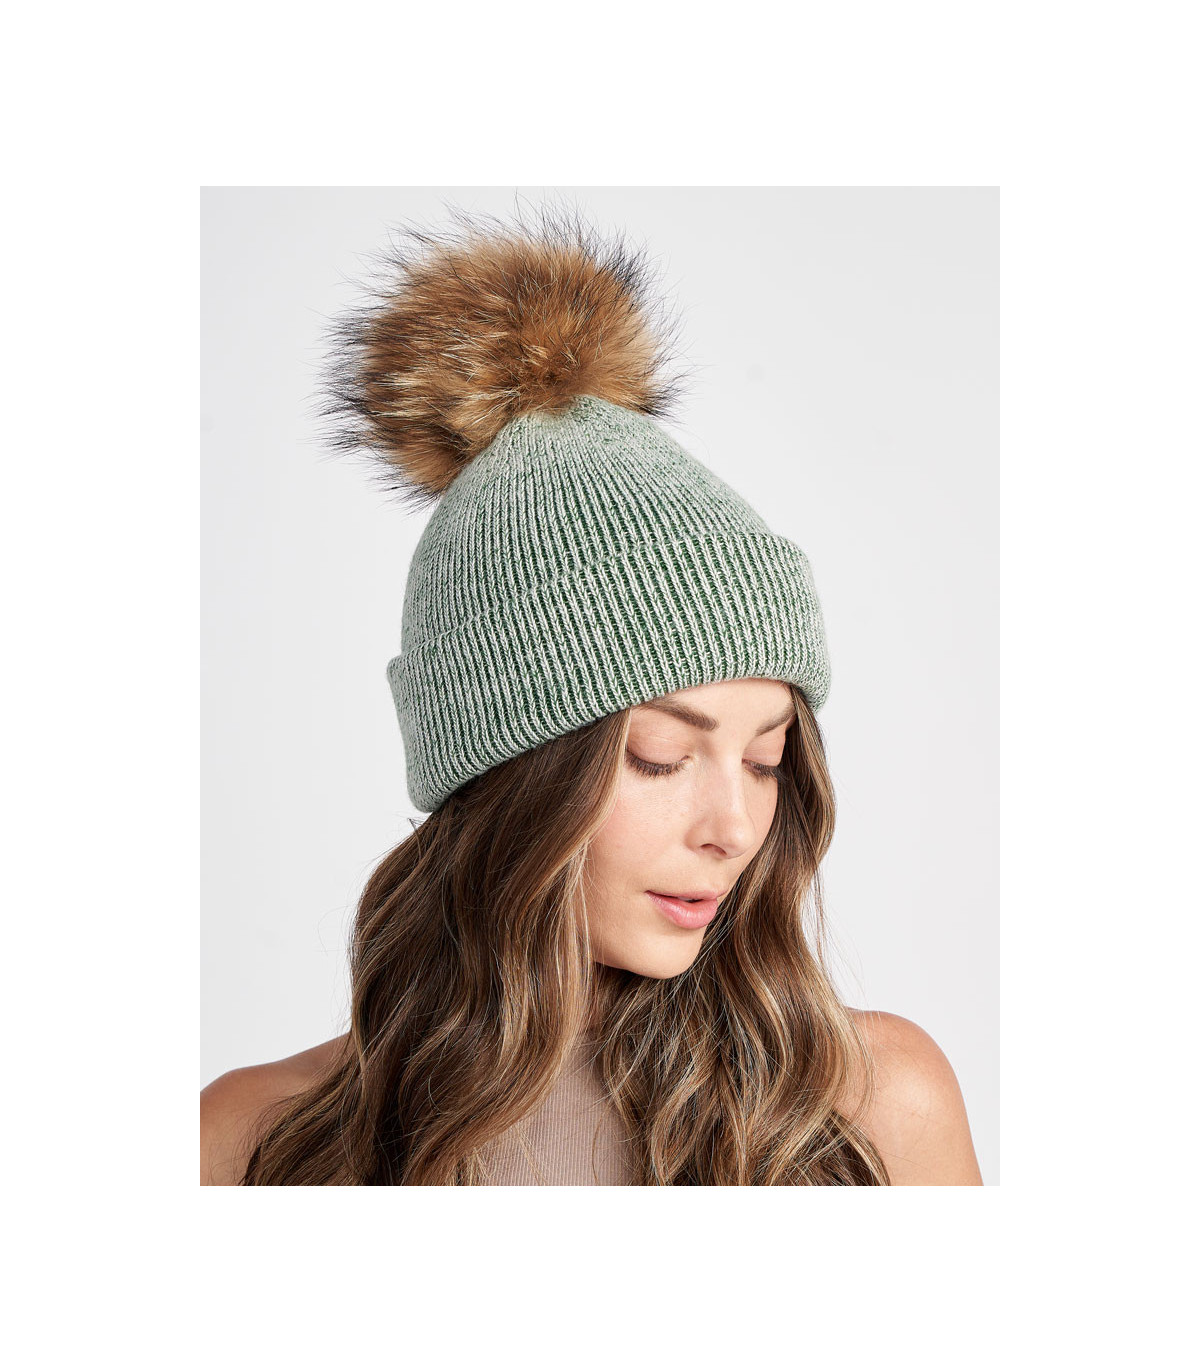 Maddy Convertible Knit Beanie Green